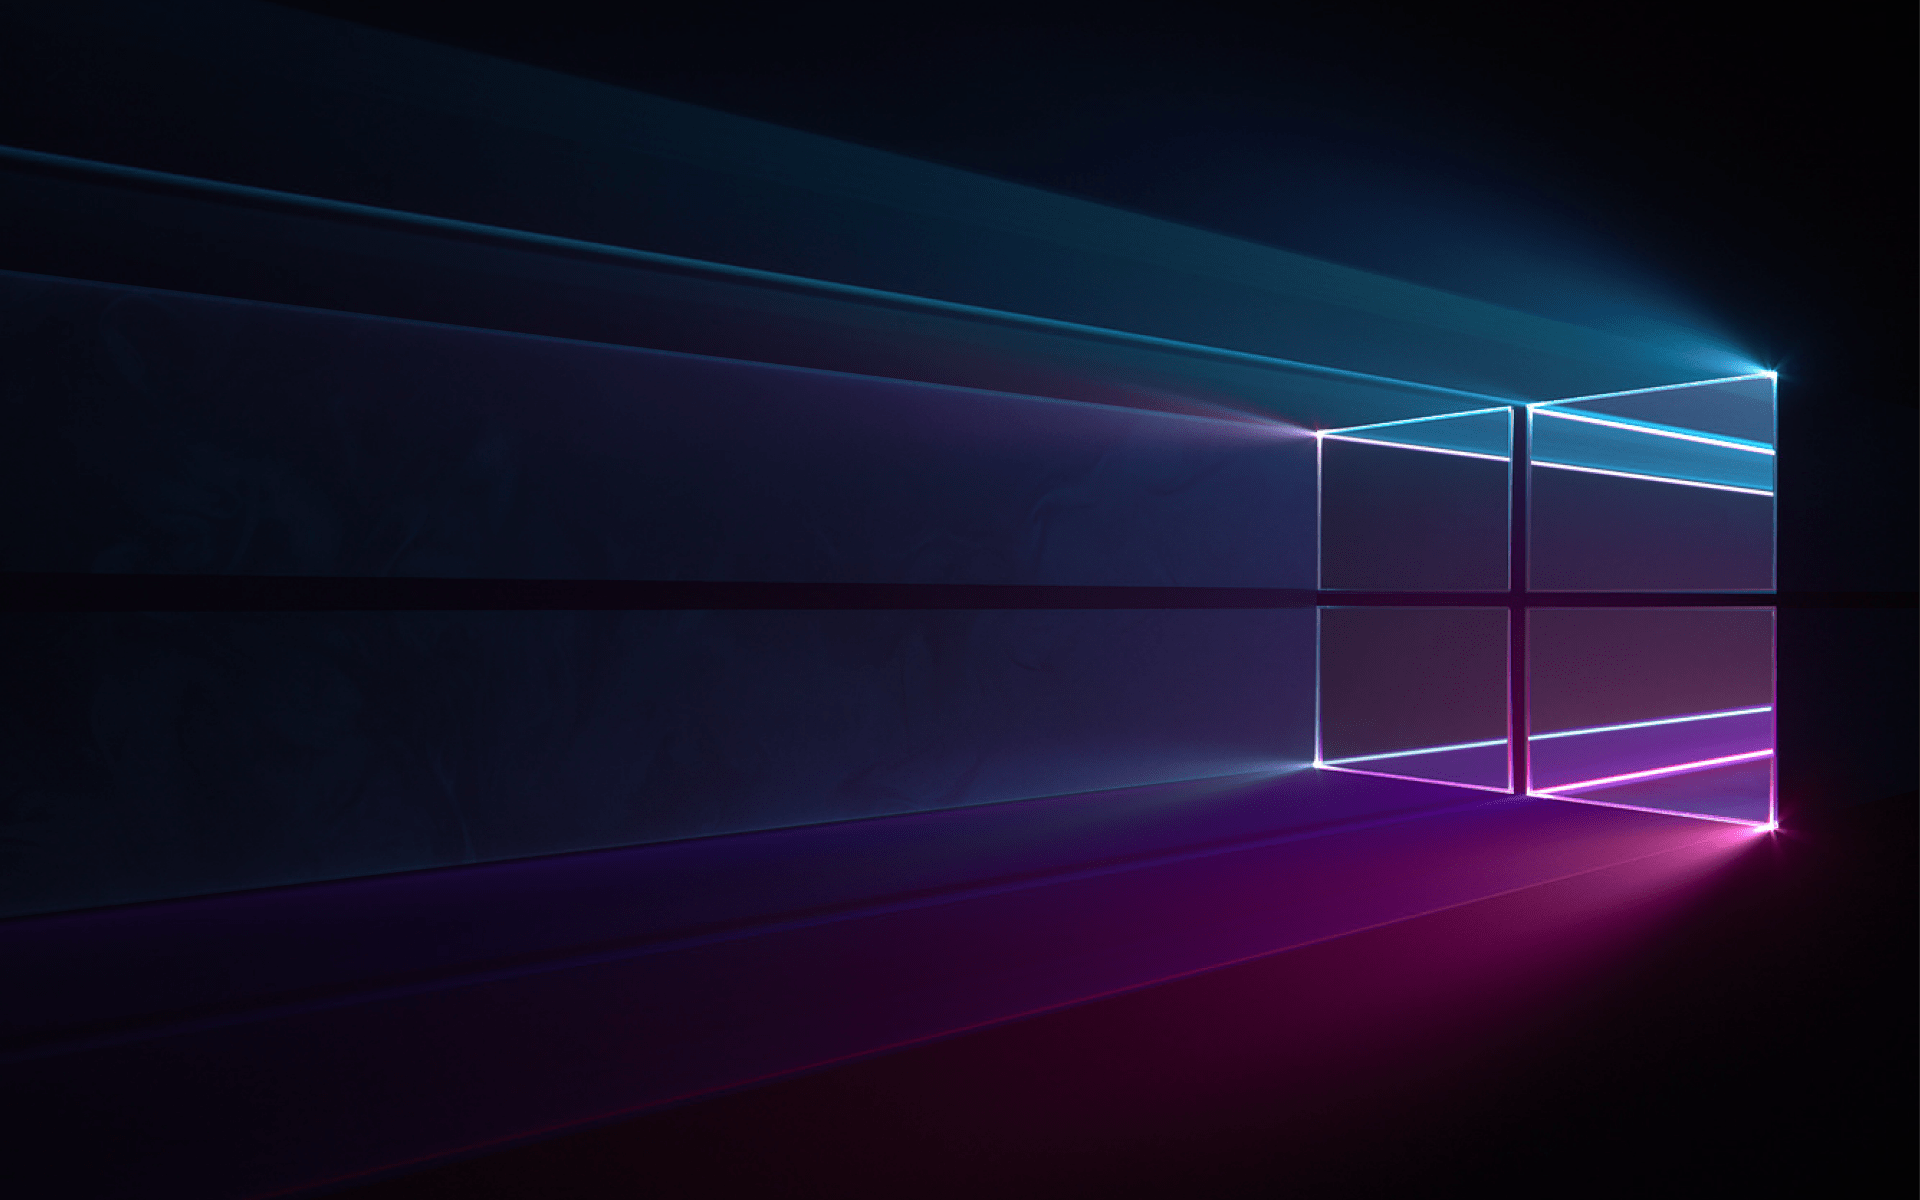 does windows 10 support live wallpapers